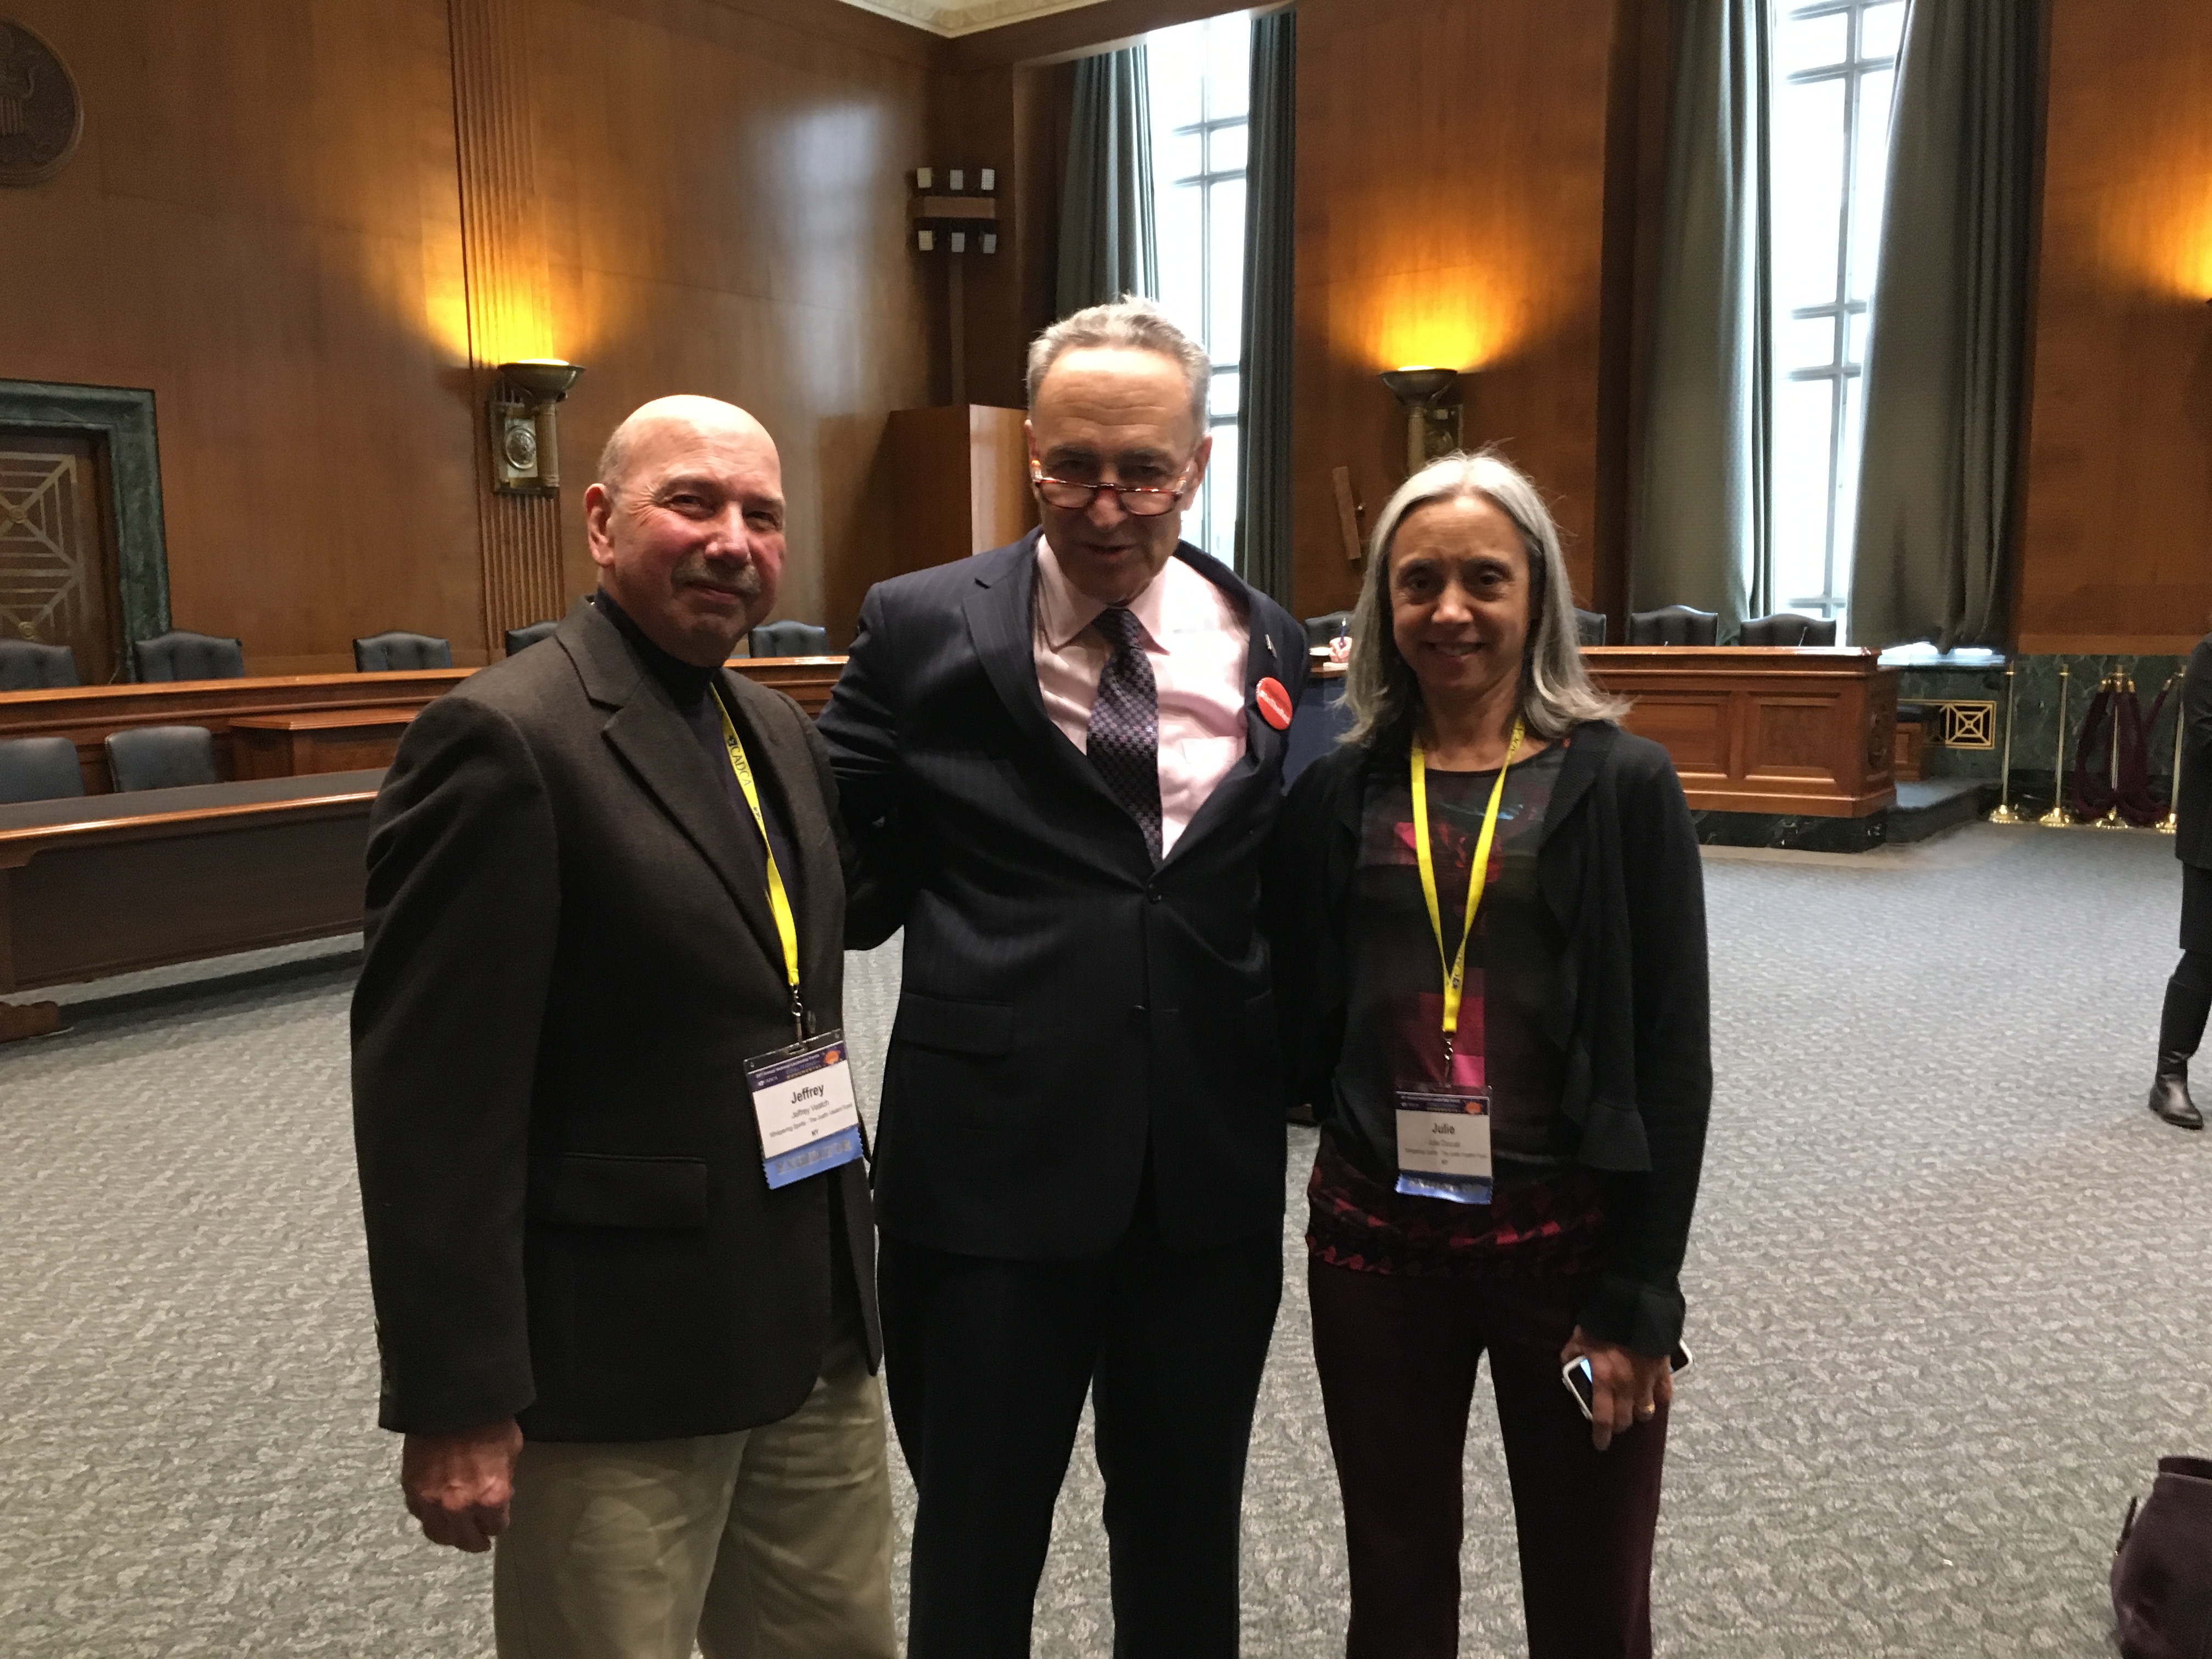 The Veatches with US Sen. Chuck Schumer (D-NY)